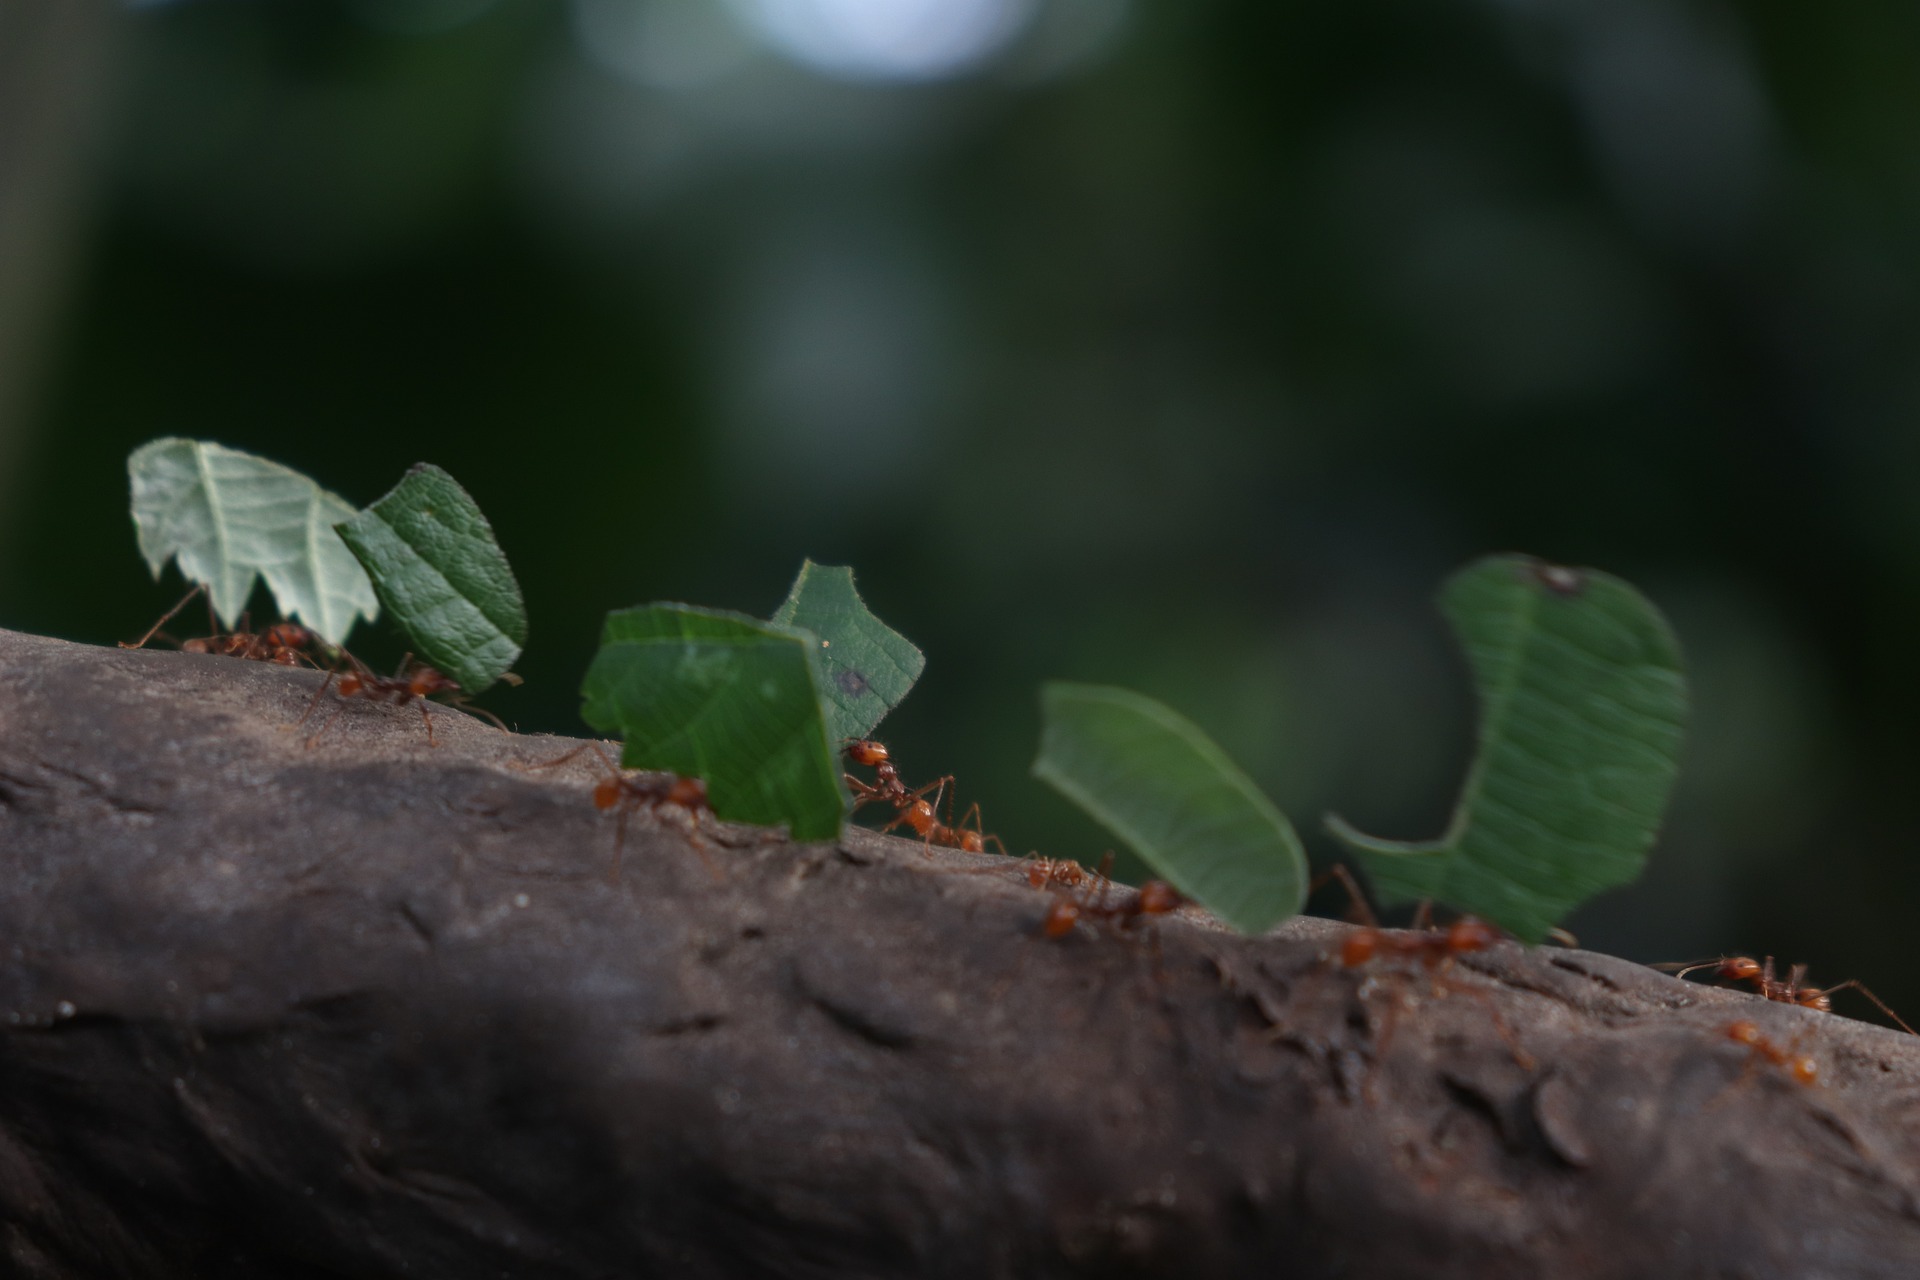 Line of ants carrying leaves